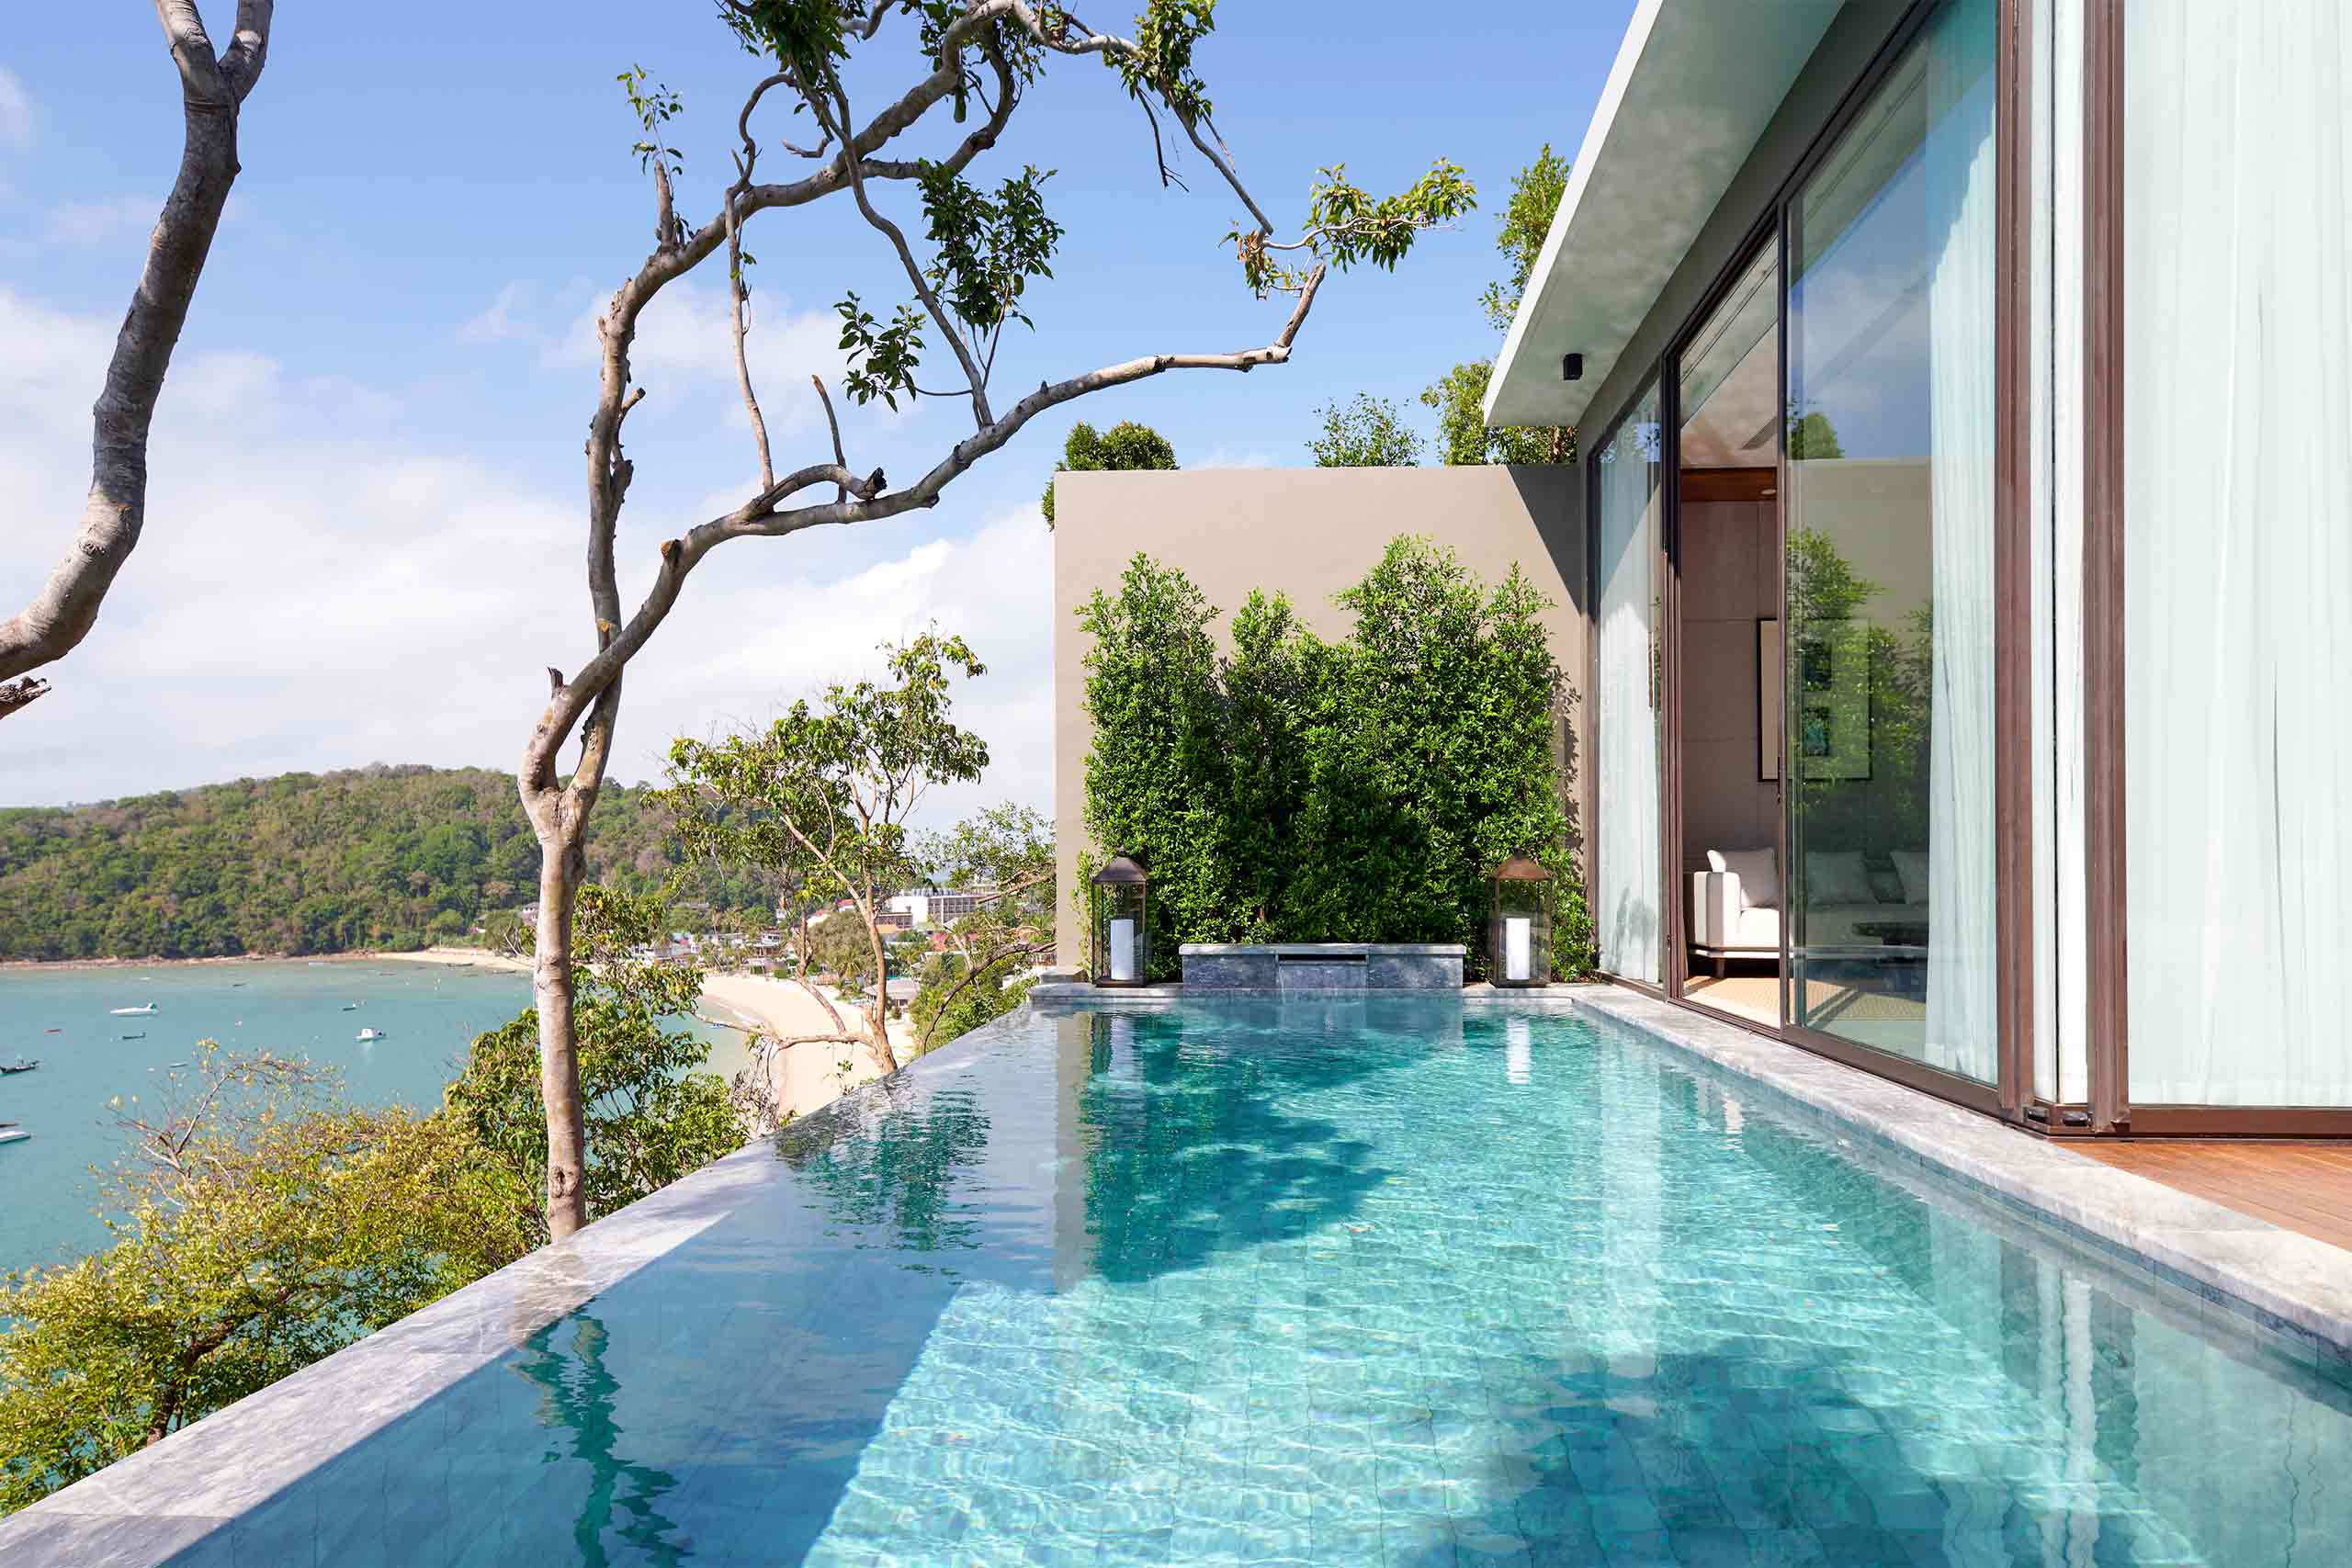 Suite with a pool at V Villas Phuket, Thailand